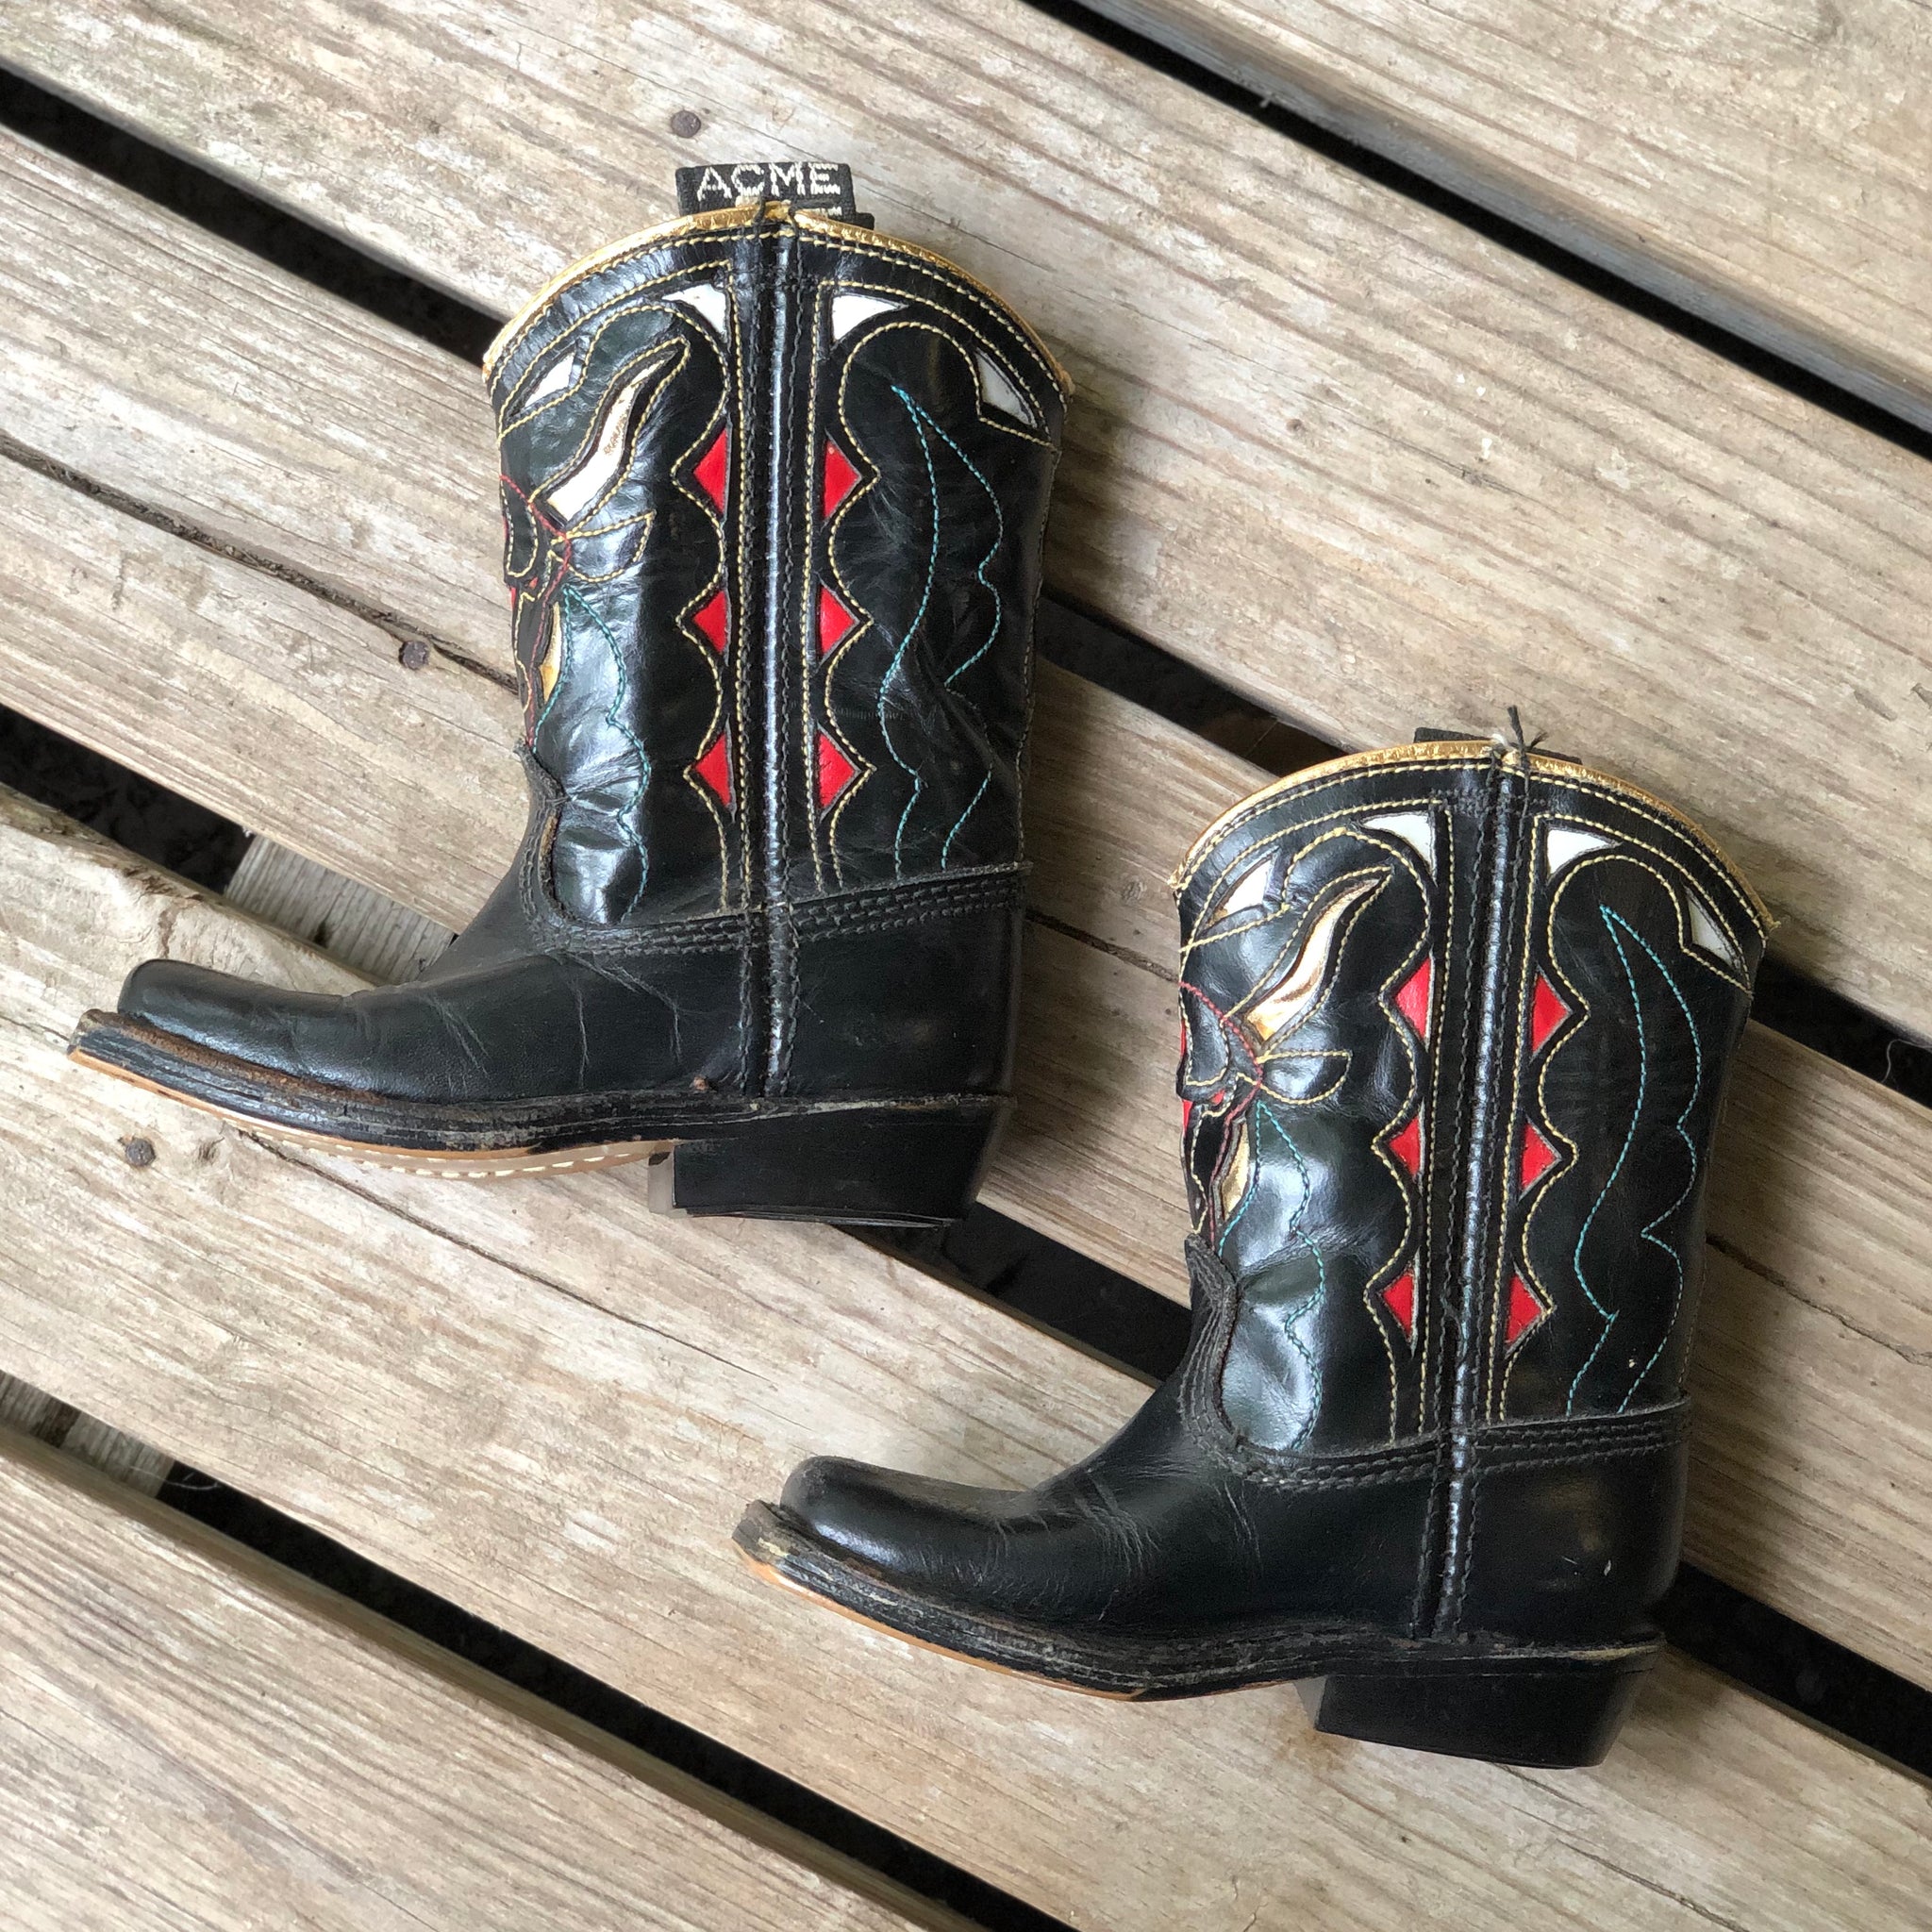 youth size 4 cowboy boots